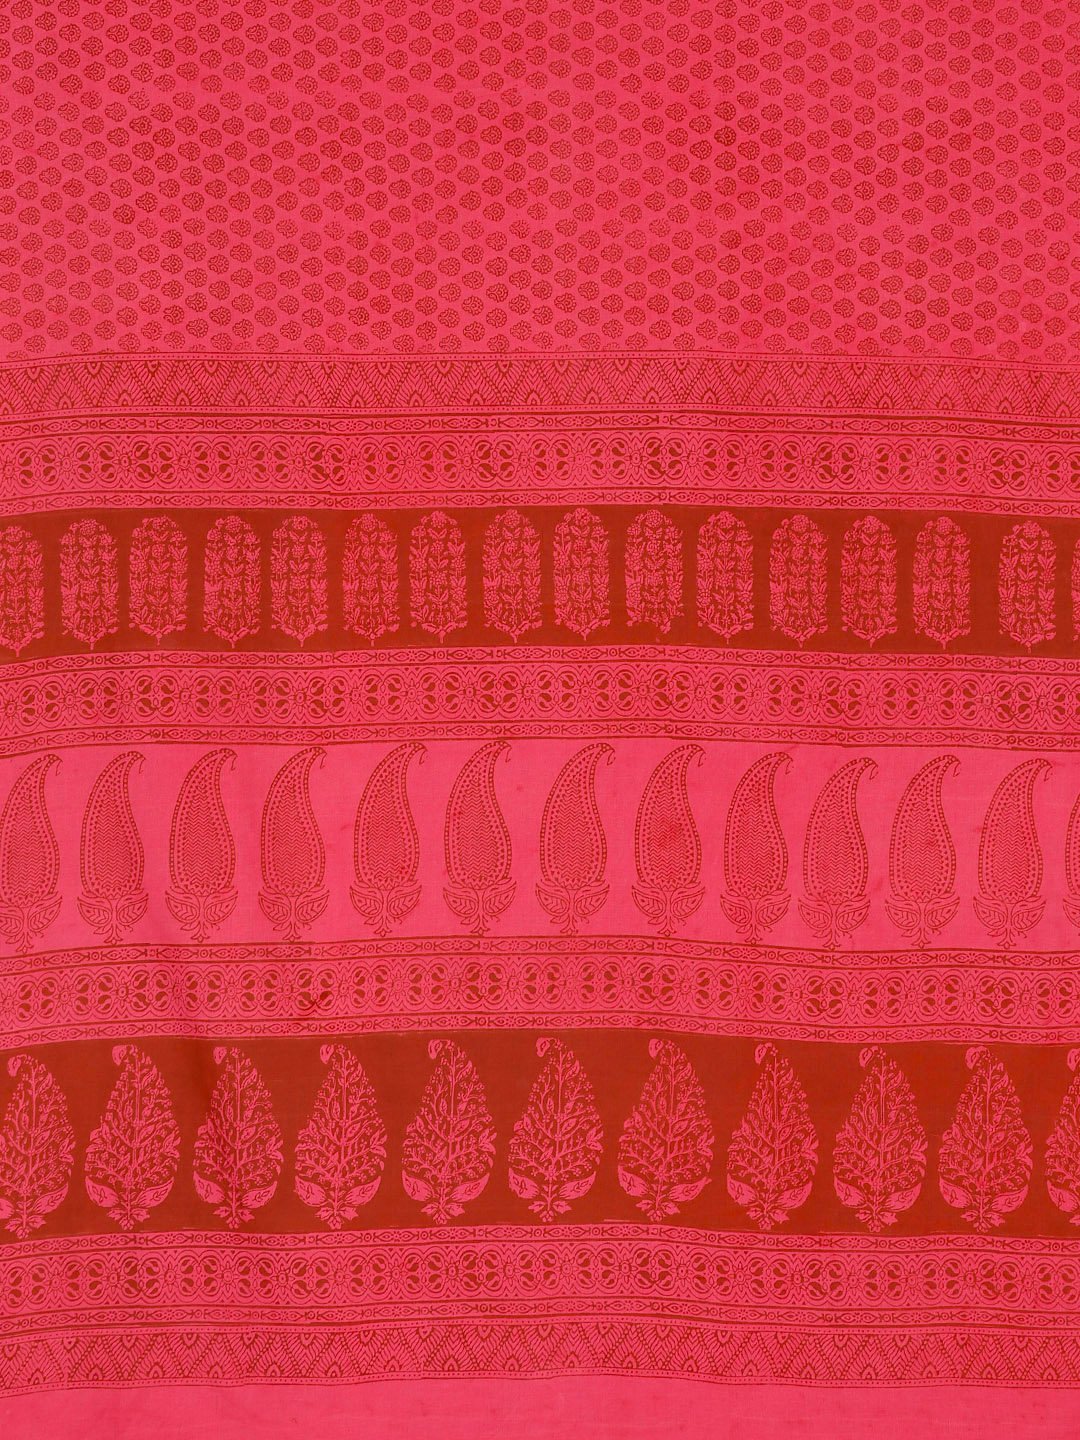 Pink Brown Pure Cotton Handblock Print Bagh Saree-Saree-Kalakari India-MYBASA0001-Bagh, Cotton, Geographical Indication, Hand Blocks, Hand Crafted, Heritage Prints, Natural Dyes, Sarees, Sustainable Fabrics-[Linen,Ethnic,wear,Fashionista,Handloom,Handicraft,Indigo,blockprint,block,print,Cotton,Chanderi,Blue, latest,classy,party,bollywood,trendy,summer,style,traditional,formal,elegant,unique,style,hand,block,print, dabu,booti,gift,present,glamorous,affordable,collectible,Sari,Saree,printed, holi,